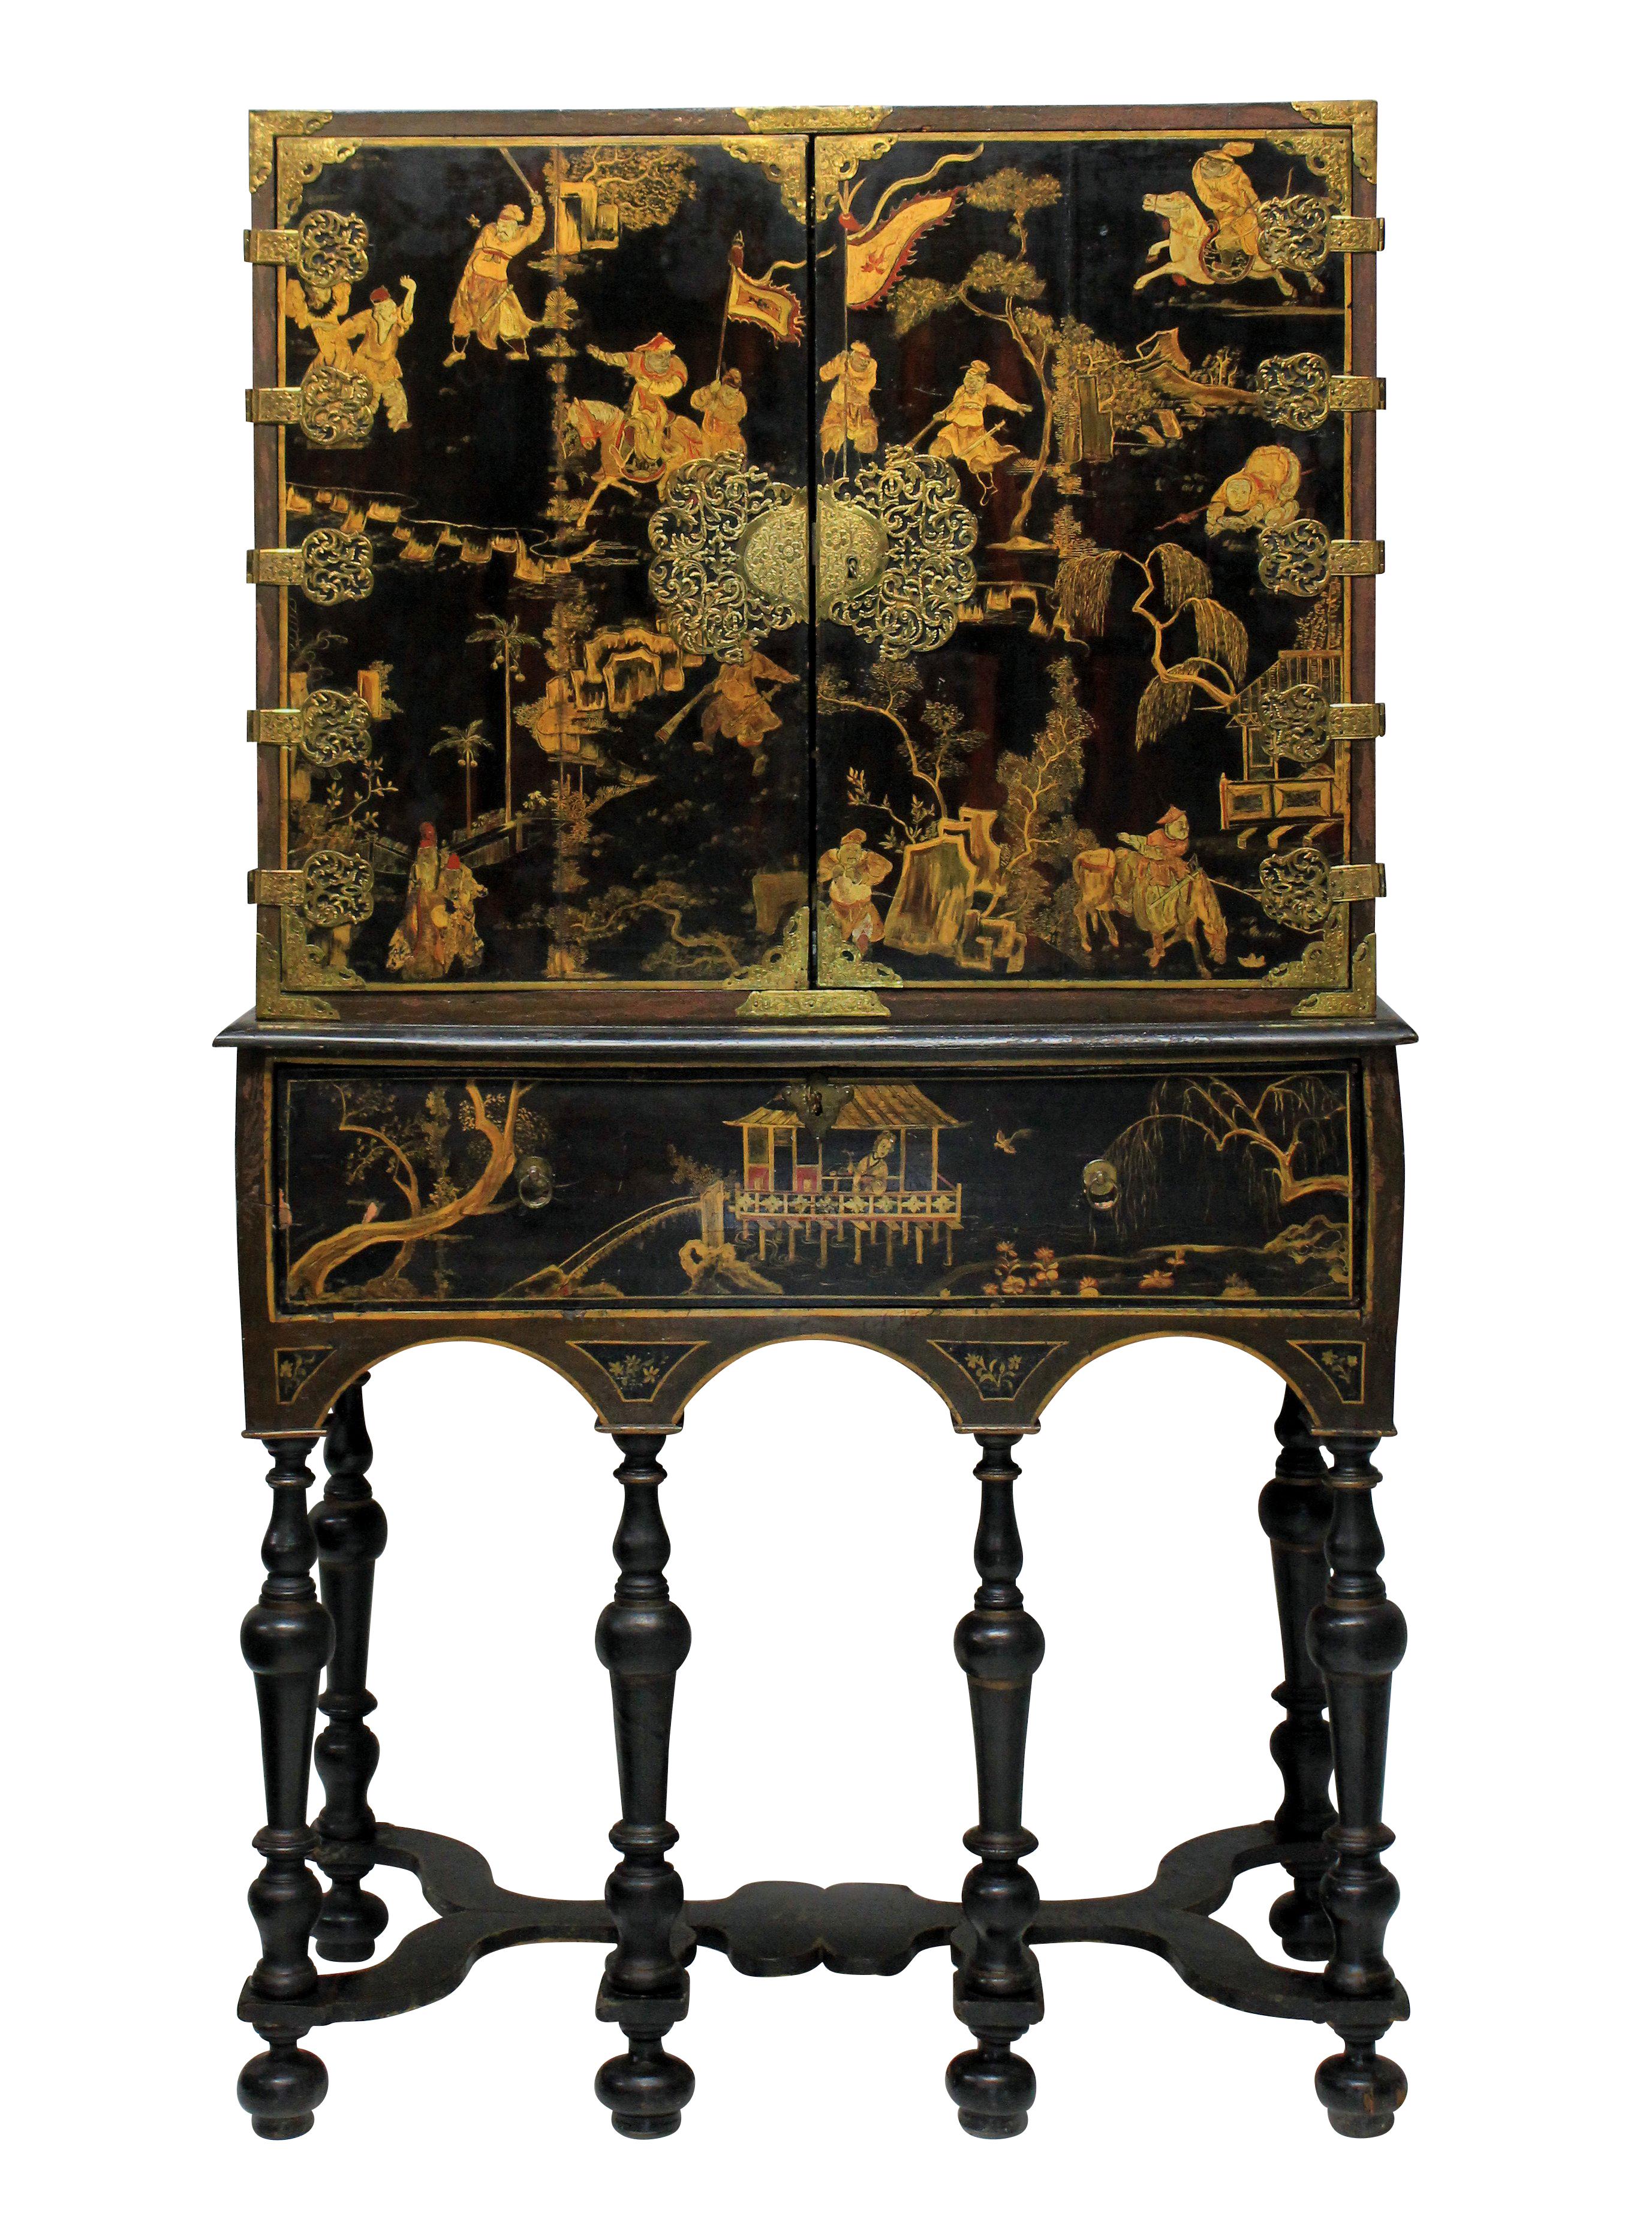 A fine William & Mary black and gilt japanned chest on stand of good quality and condition. Depicting landscapes, foliage and warriors (some chasing butterflies with their swords). The cupboard doors, decorated on both sides, with shaped filigree